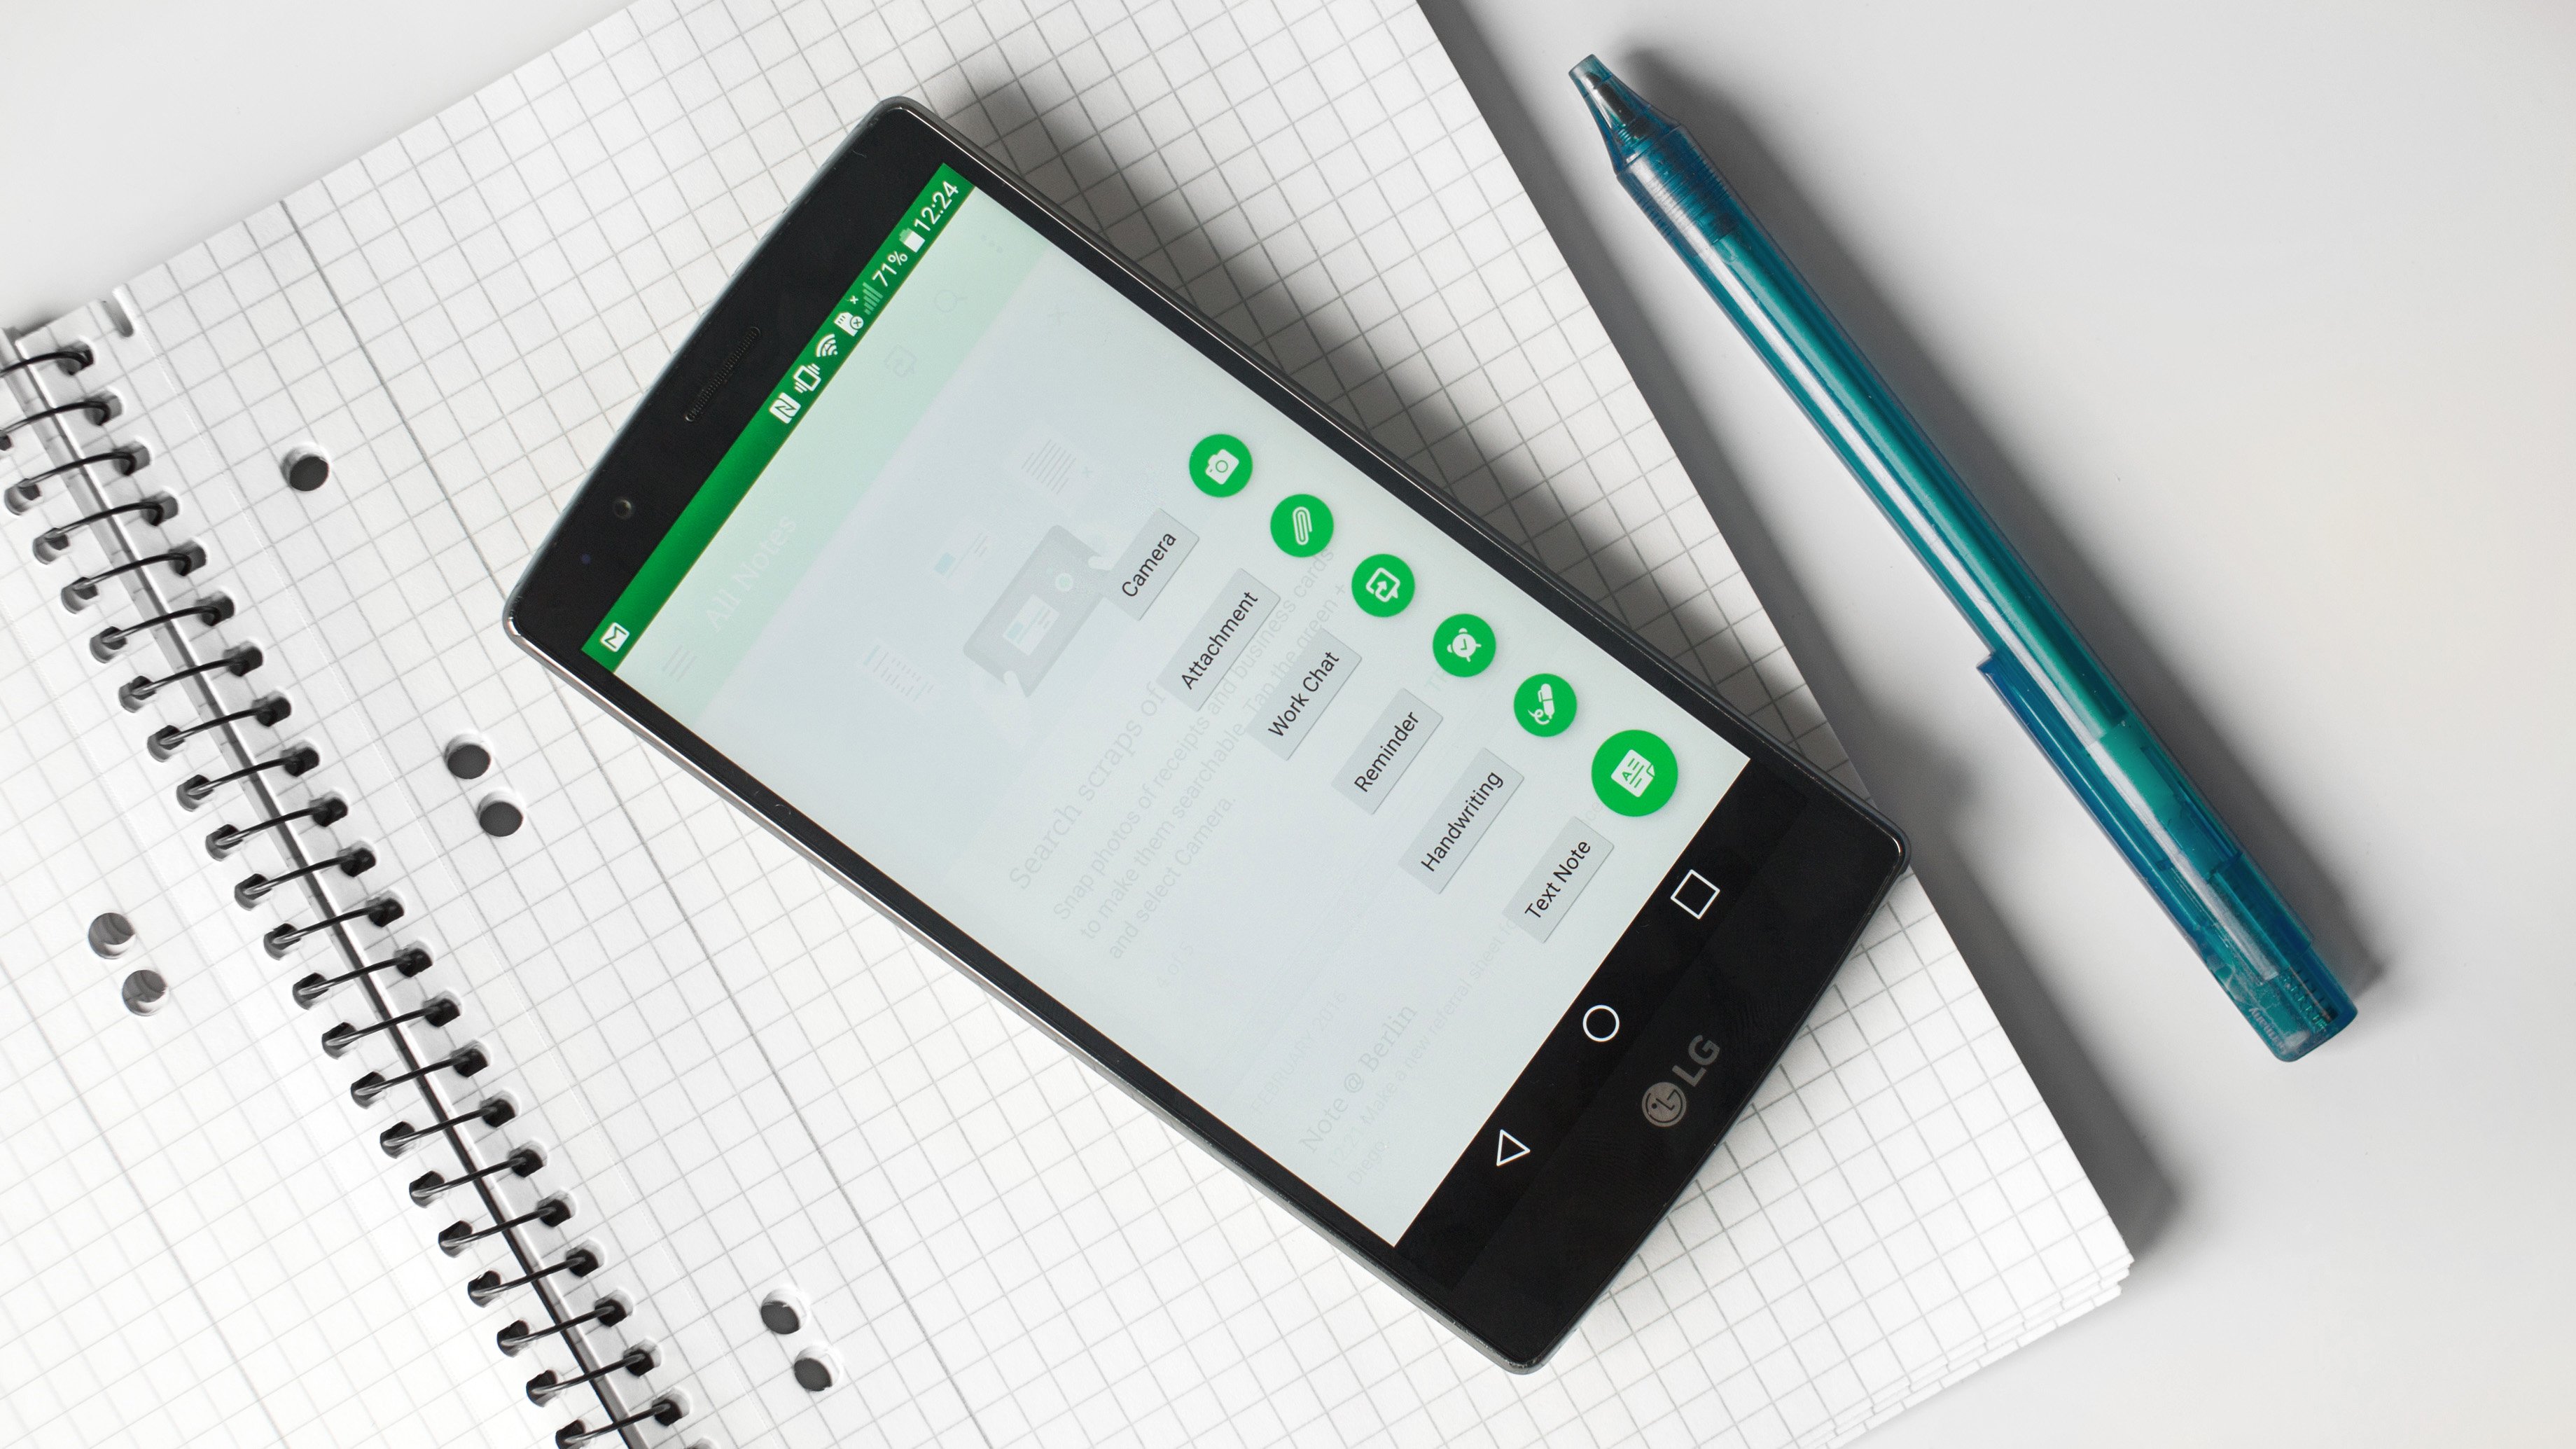 Best note taking apps for Android the definitive list for organizing